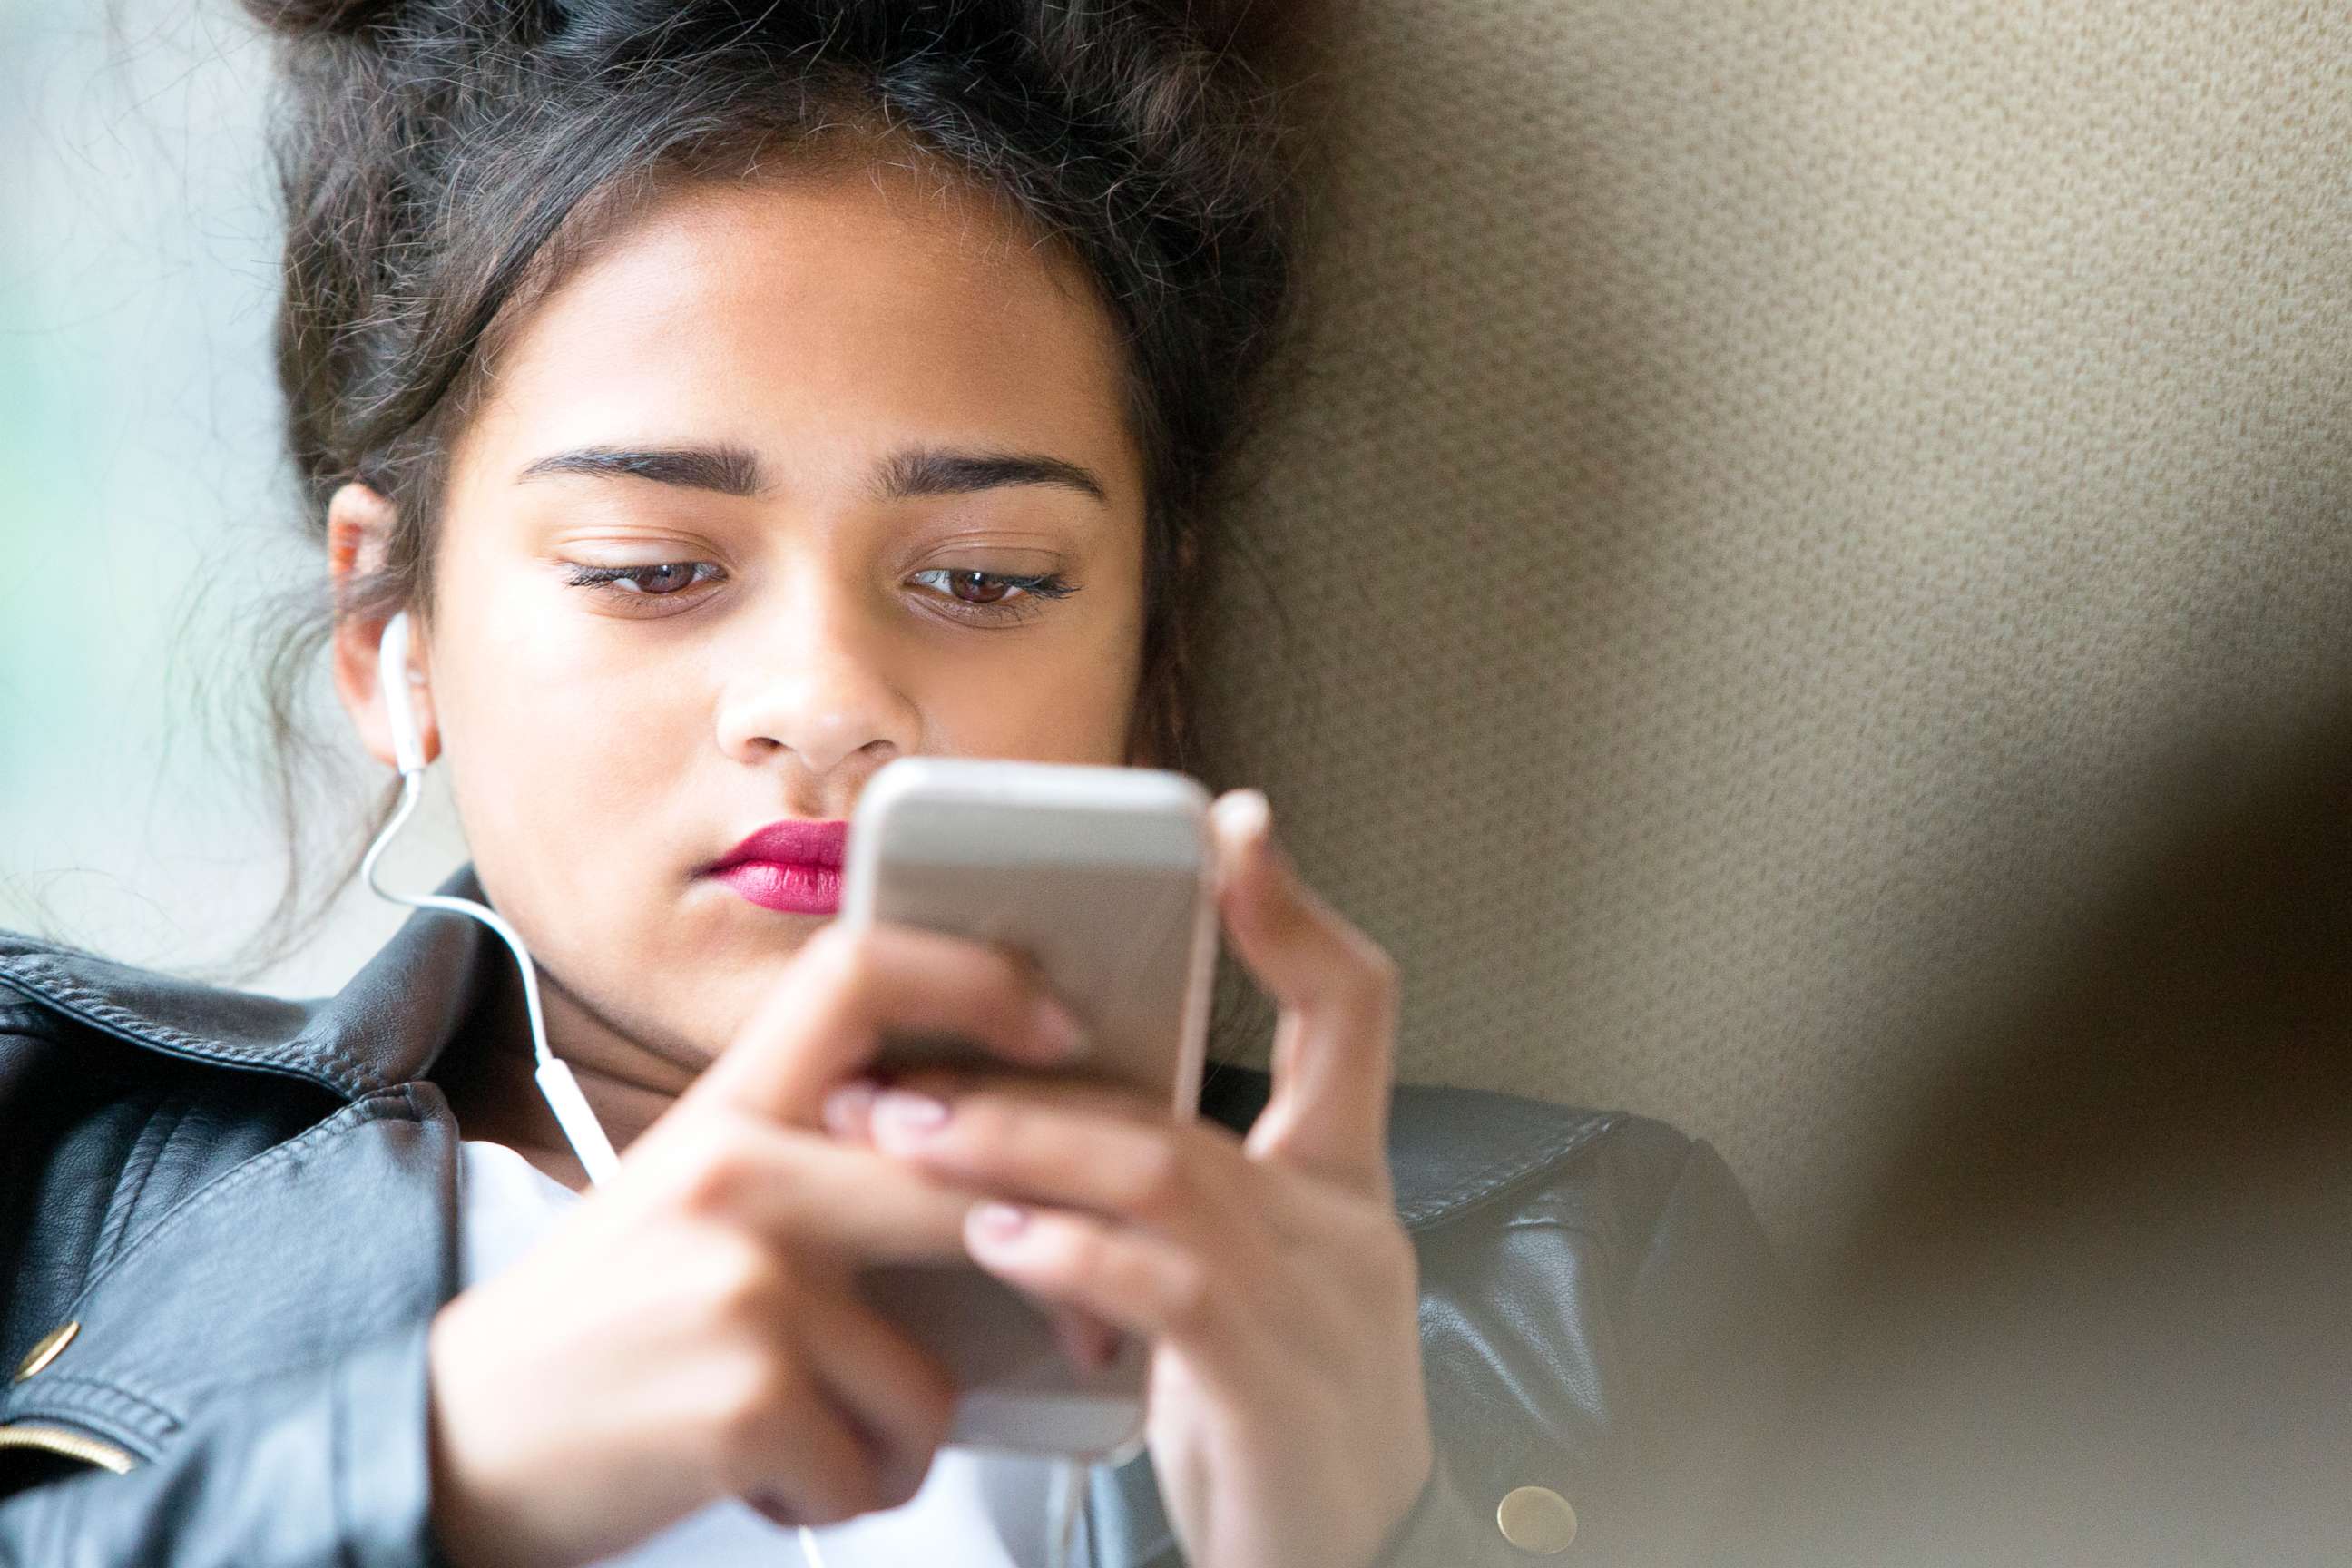 PHOTO: A teenage girl looks at her phone in this undated stock photo.